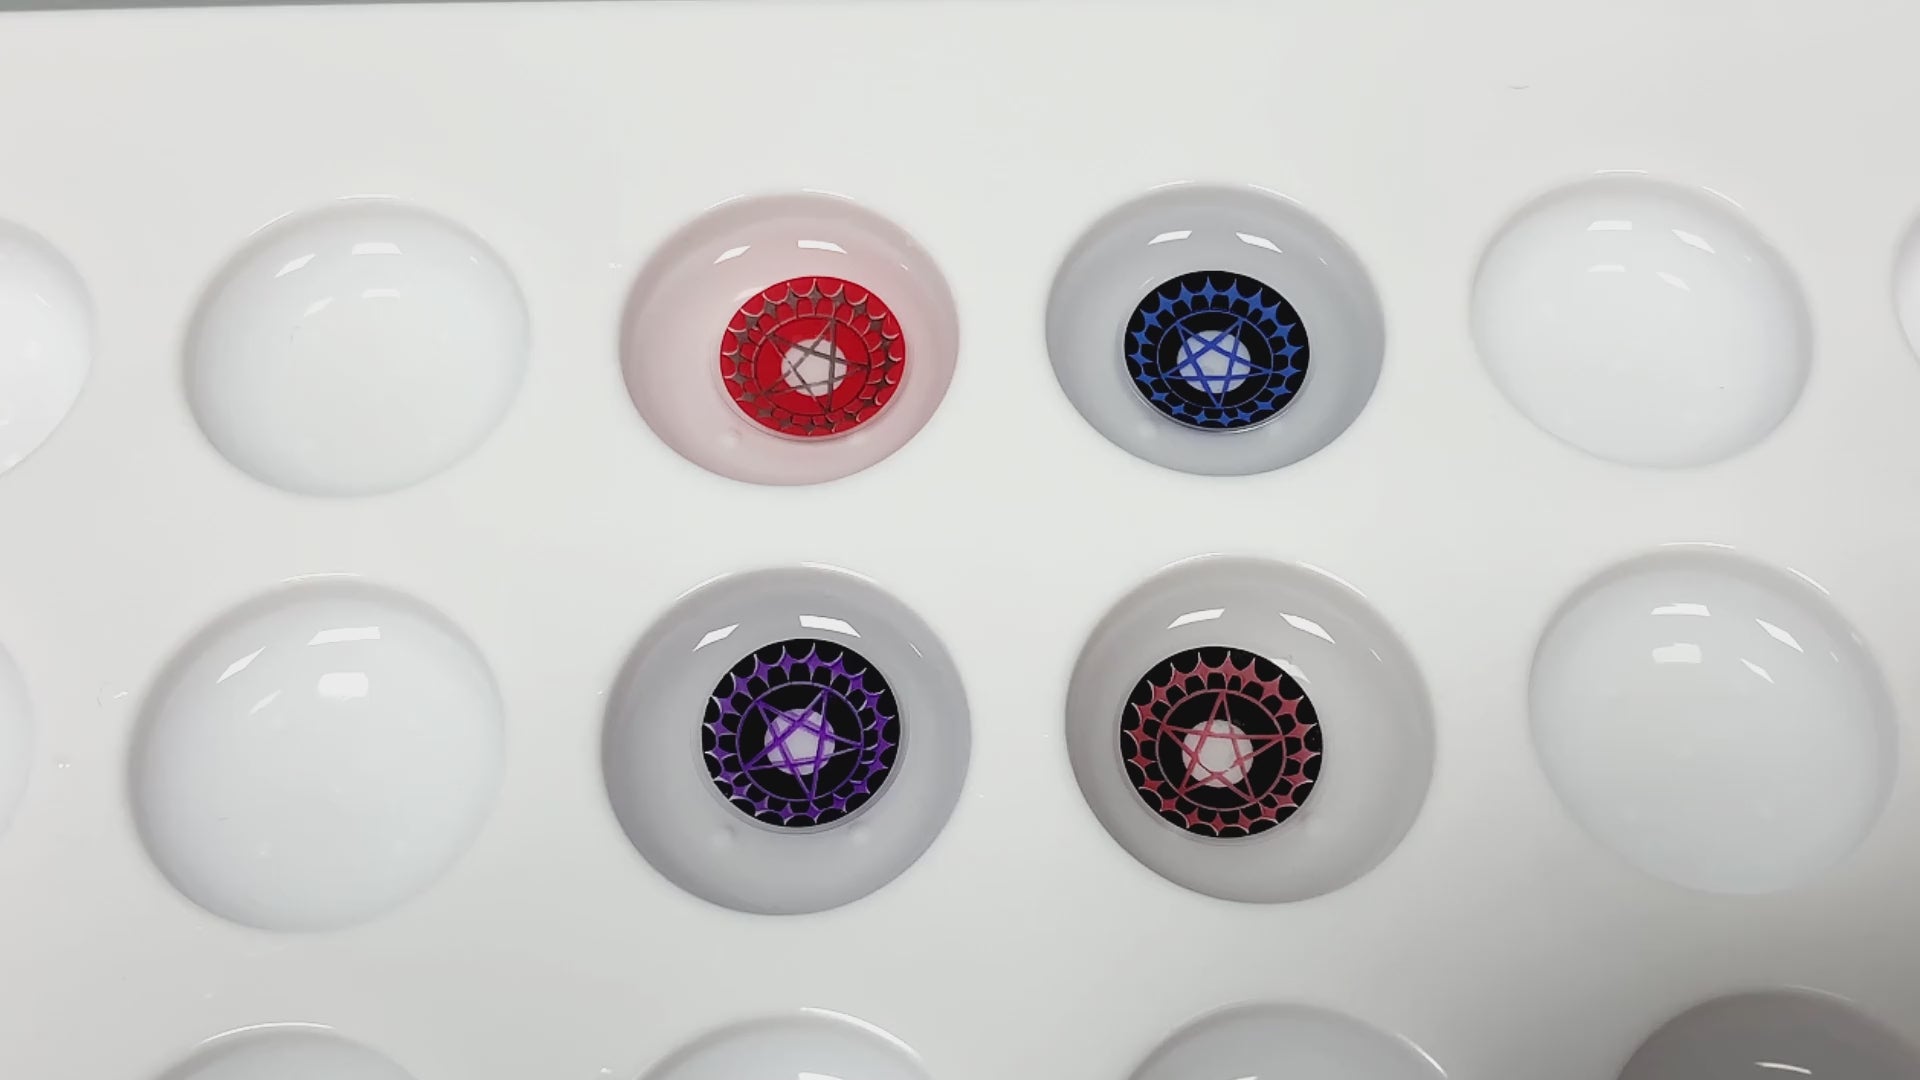 Product video presenting a range of five-pointed star shape cosplay contact lenses, featuring close-up views of the lenses in various shades and demonstrating how they appear when applied to the eyes.